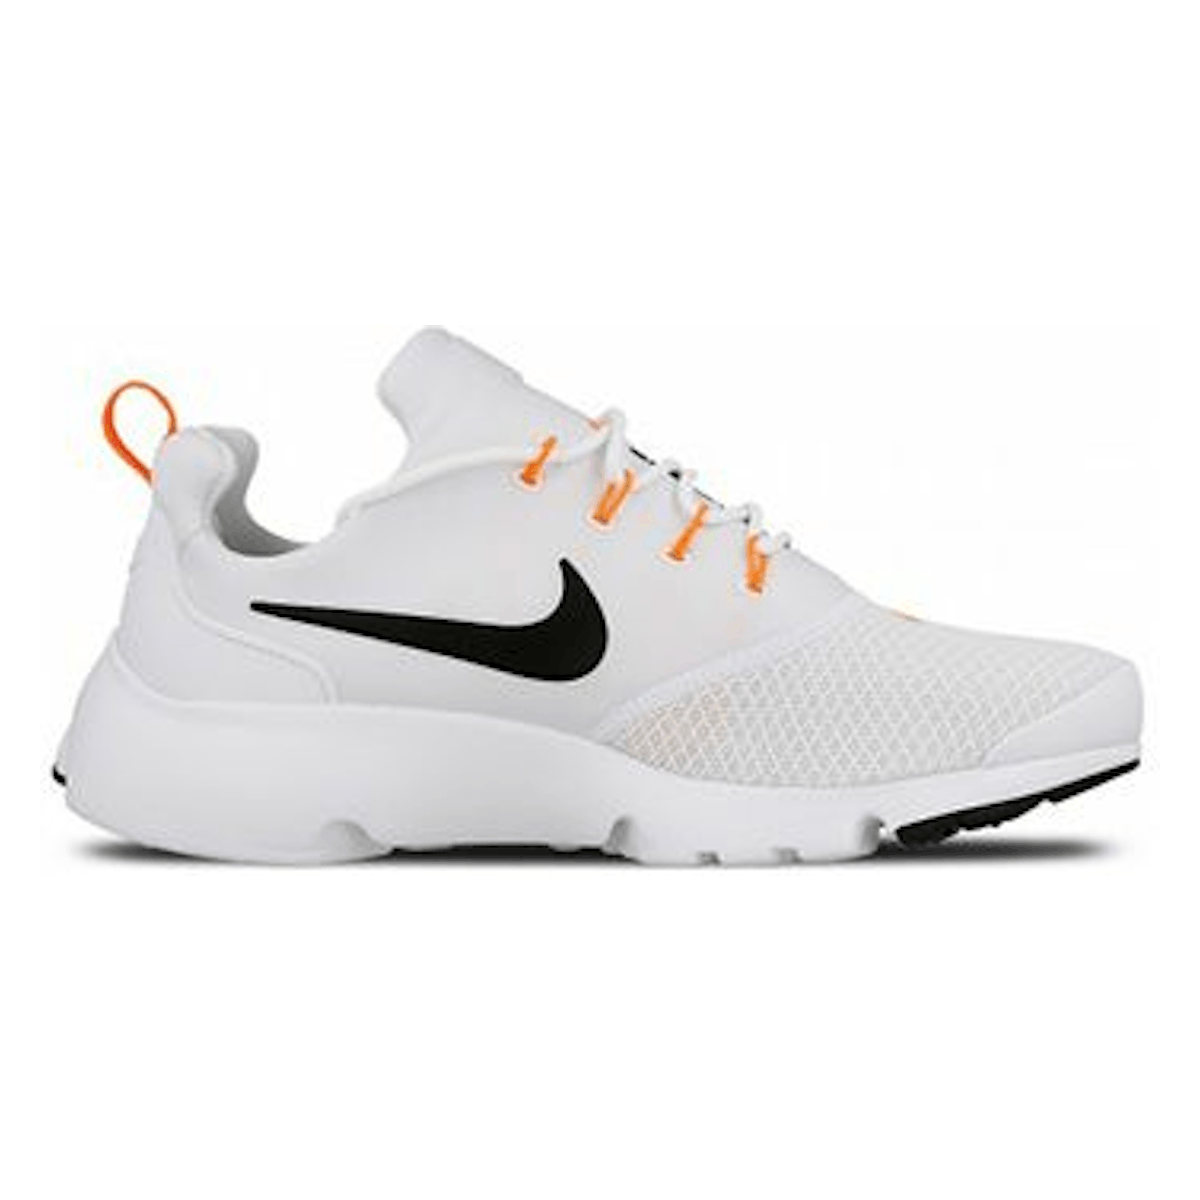 Nike Air Presto Fly Just Do It "White"